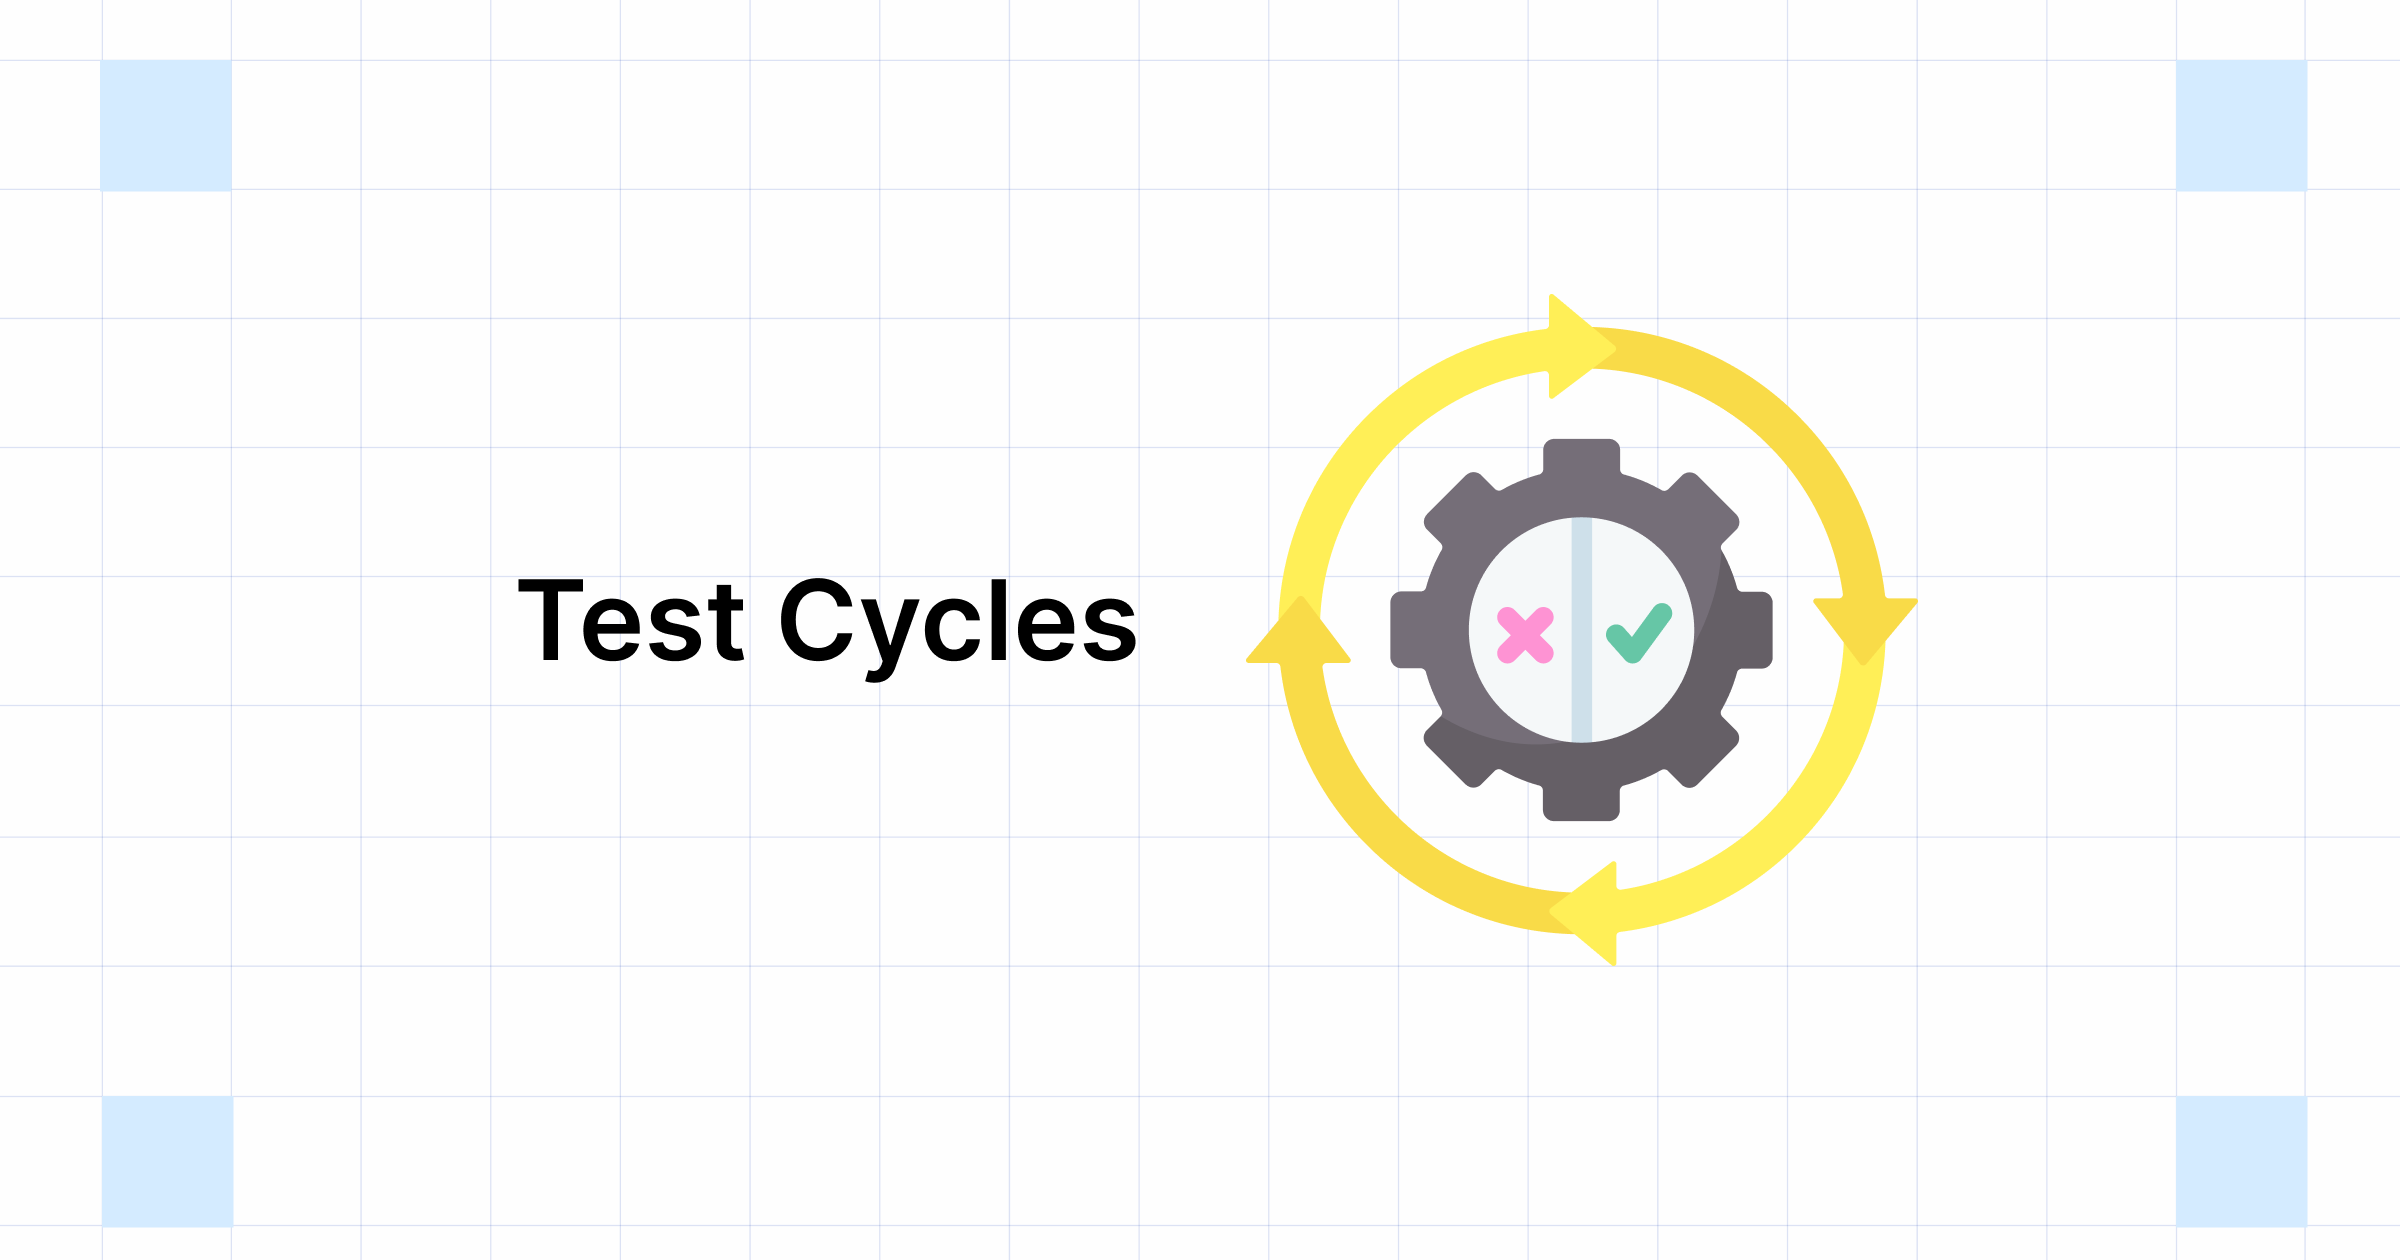 Test Cycles